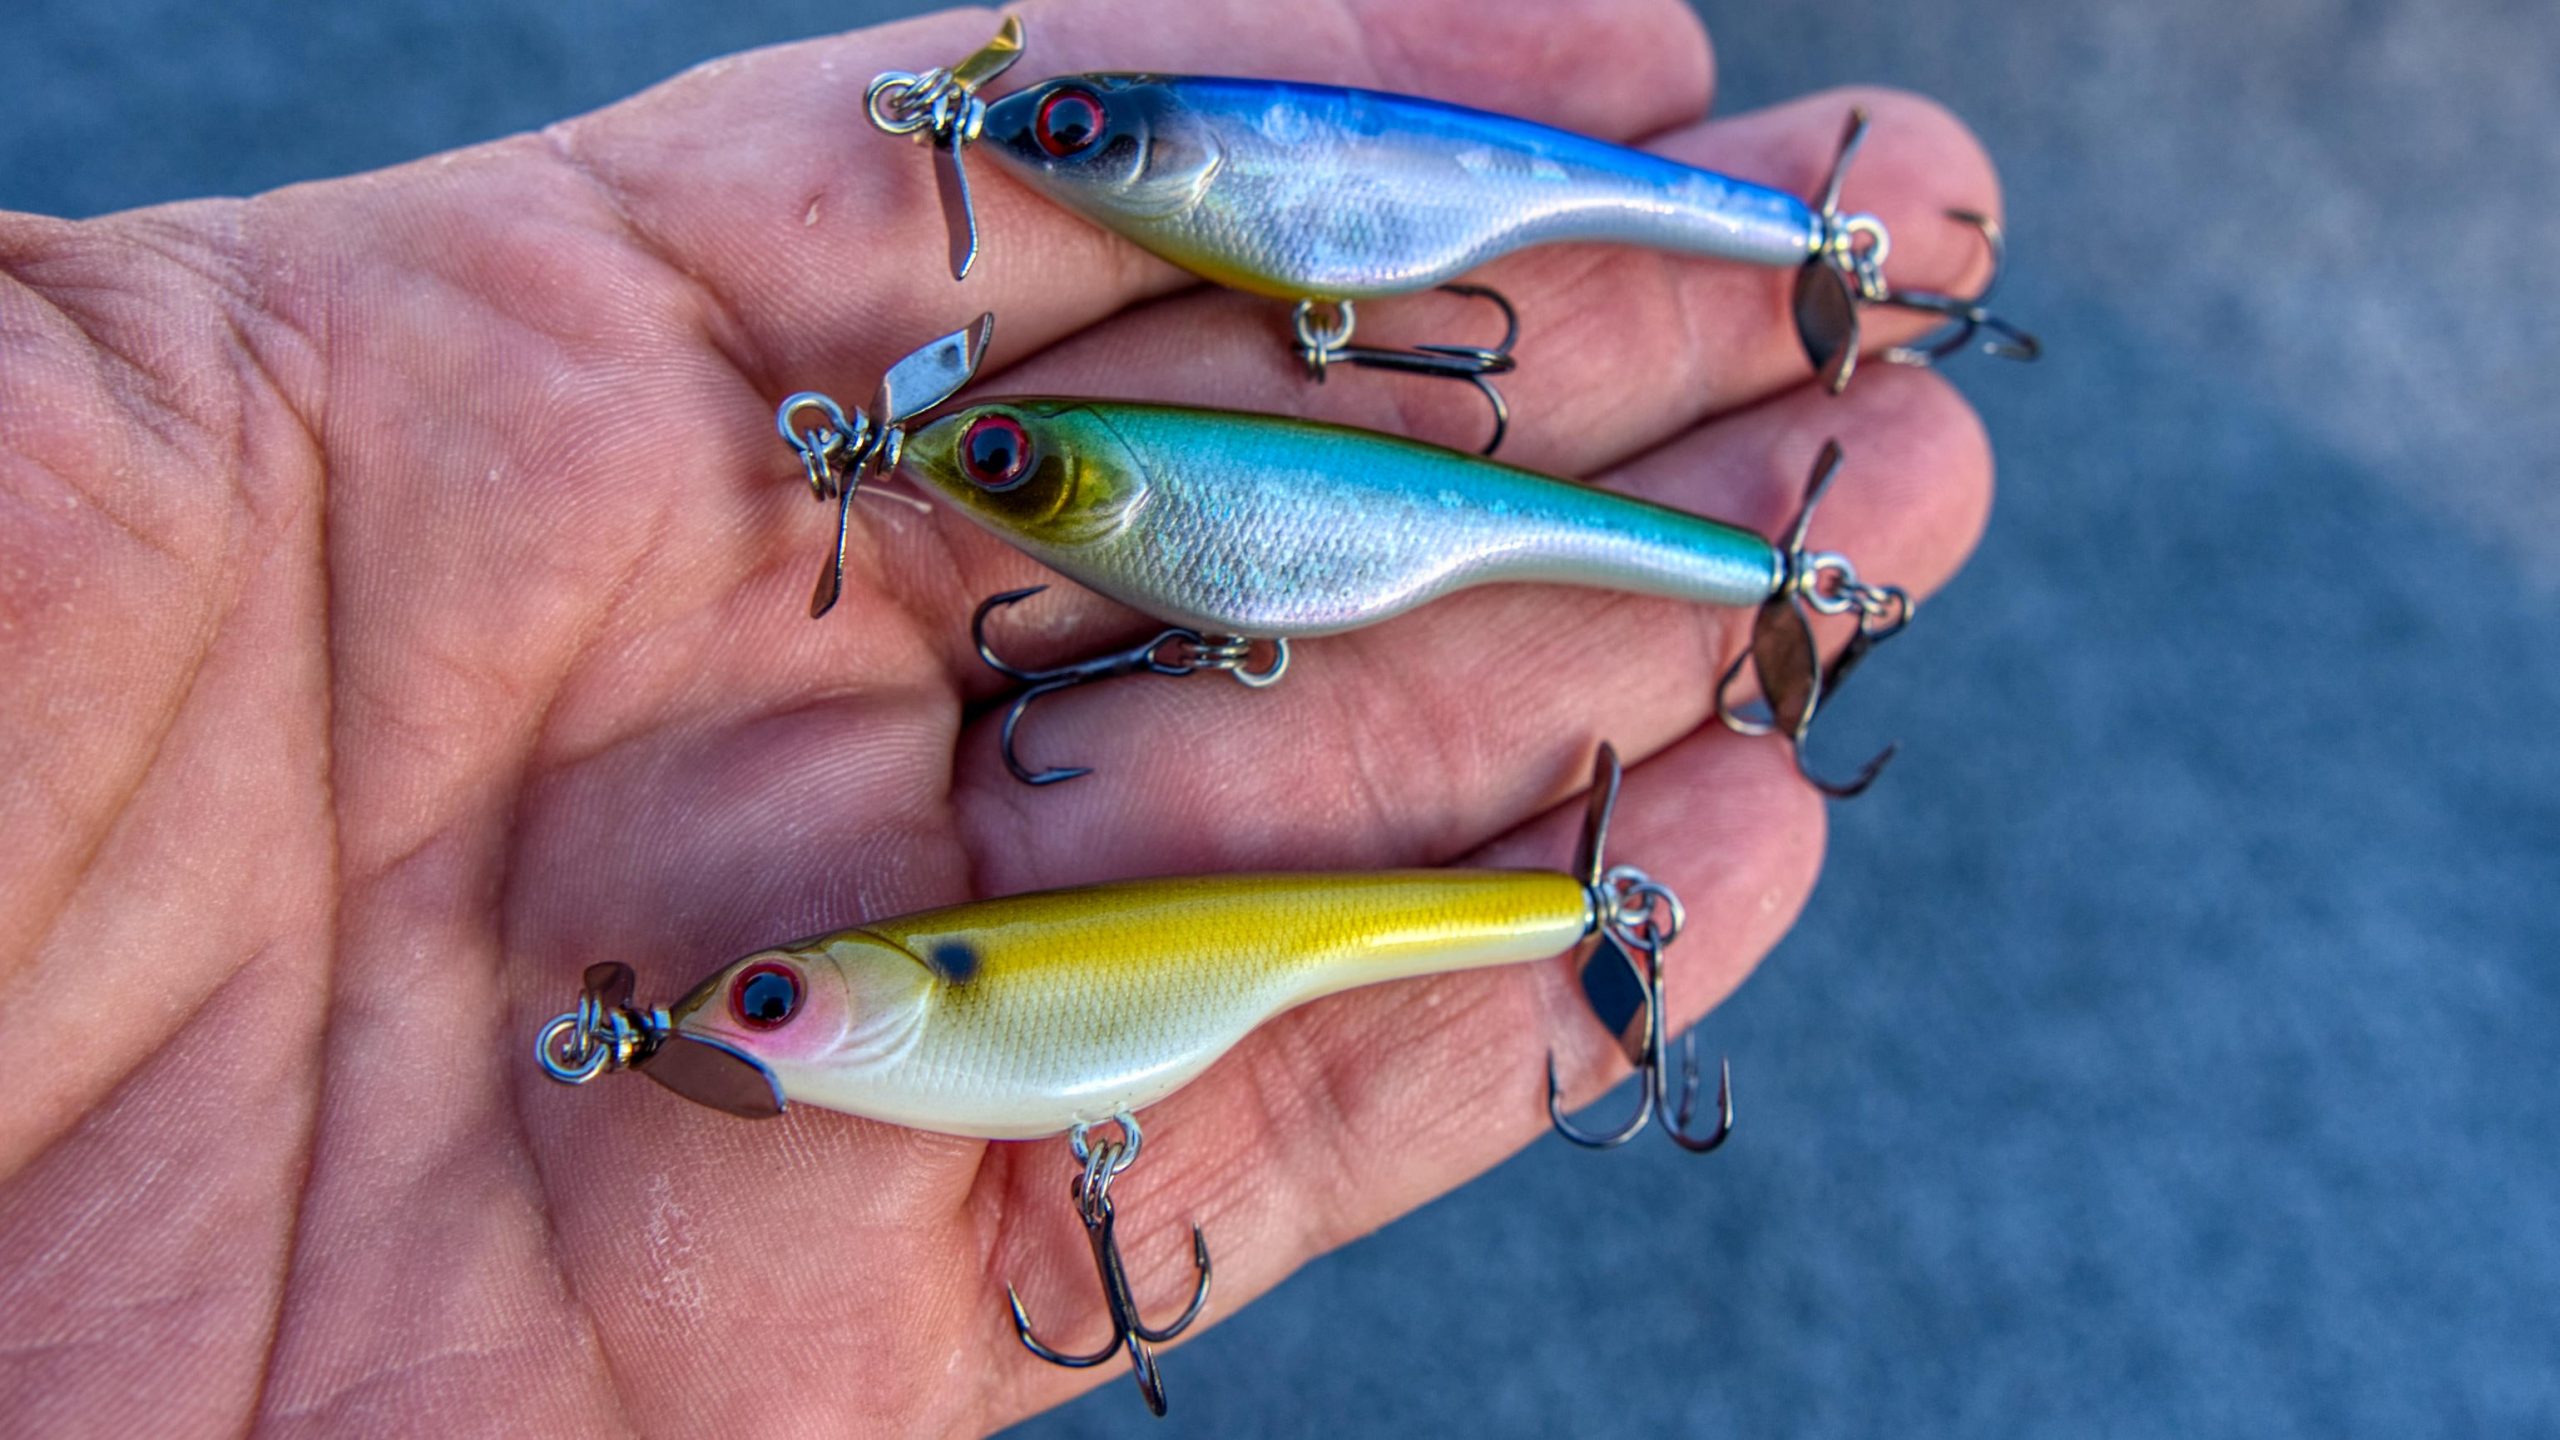 Home made fishing lures? - Spyderco Forums